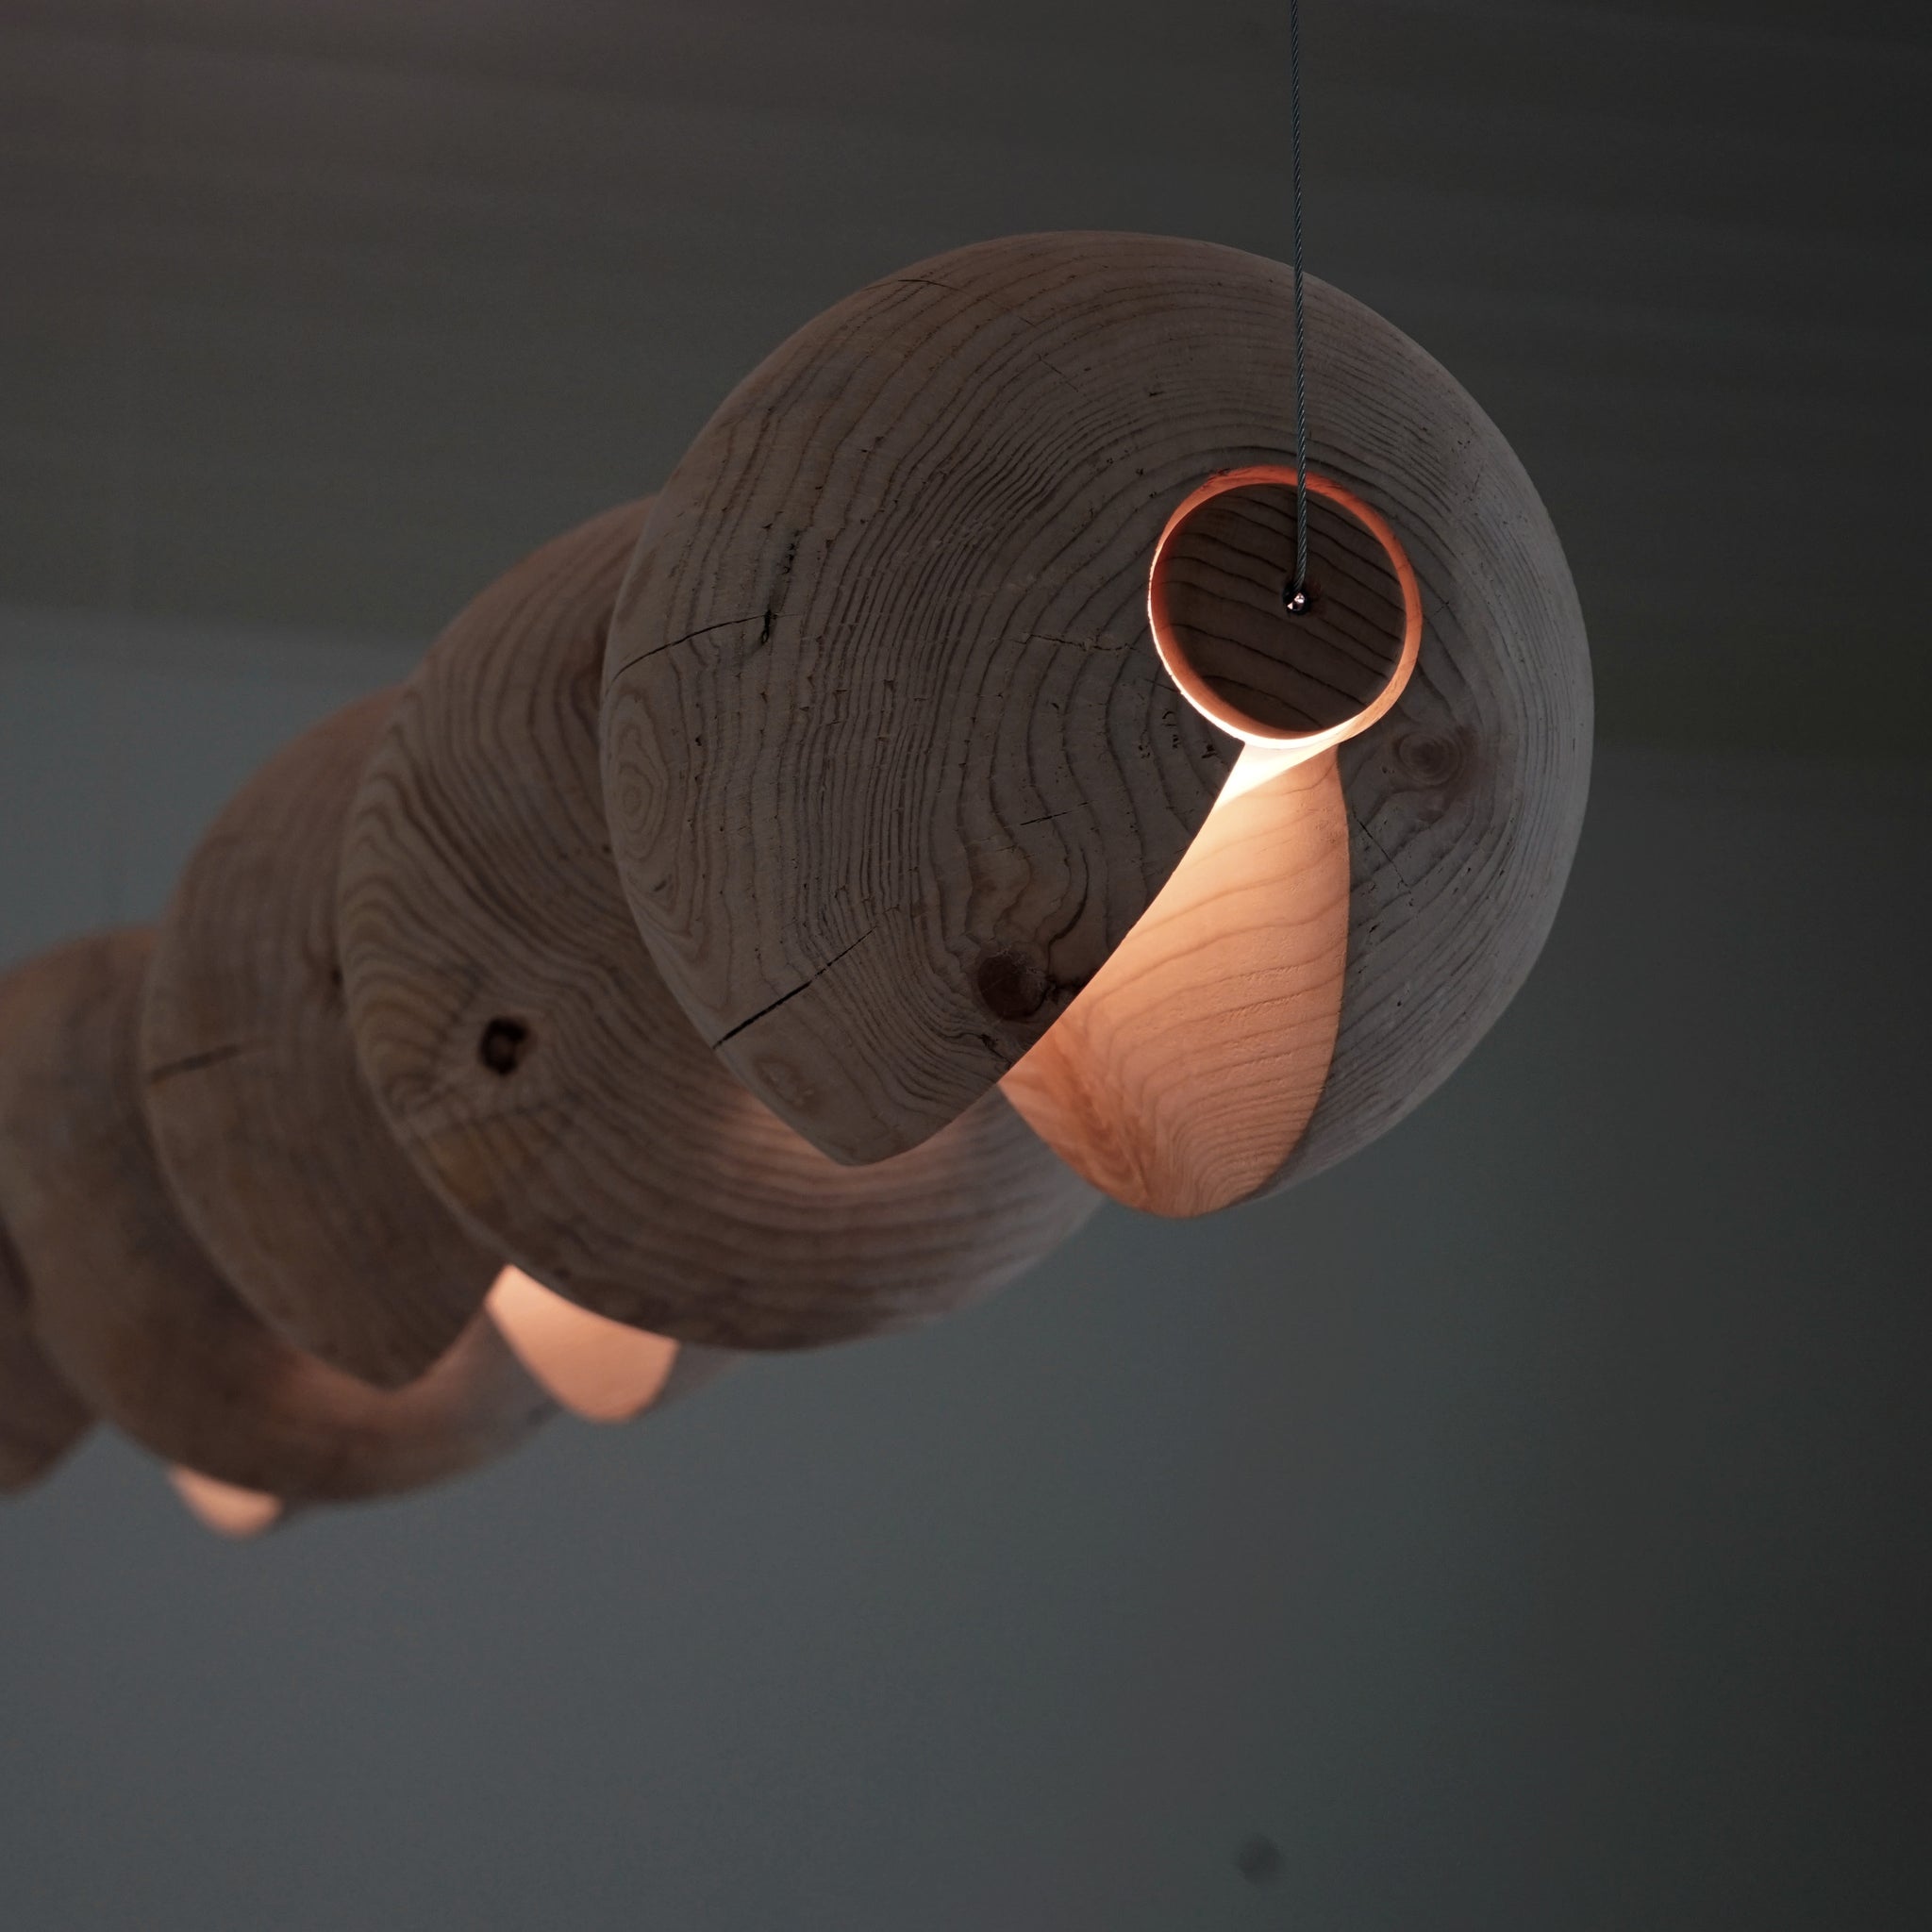 Statement light made from 5 cedar spheres wrapped around a light rod suspended by thin cables.